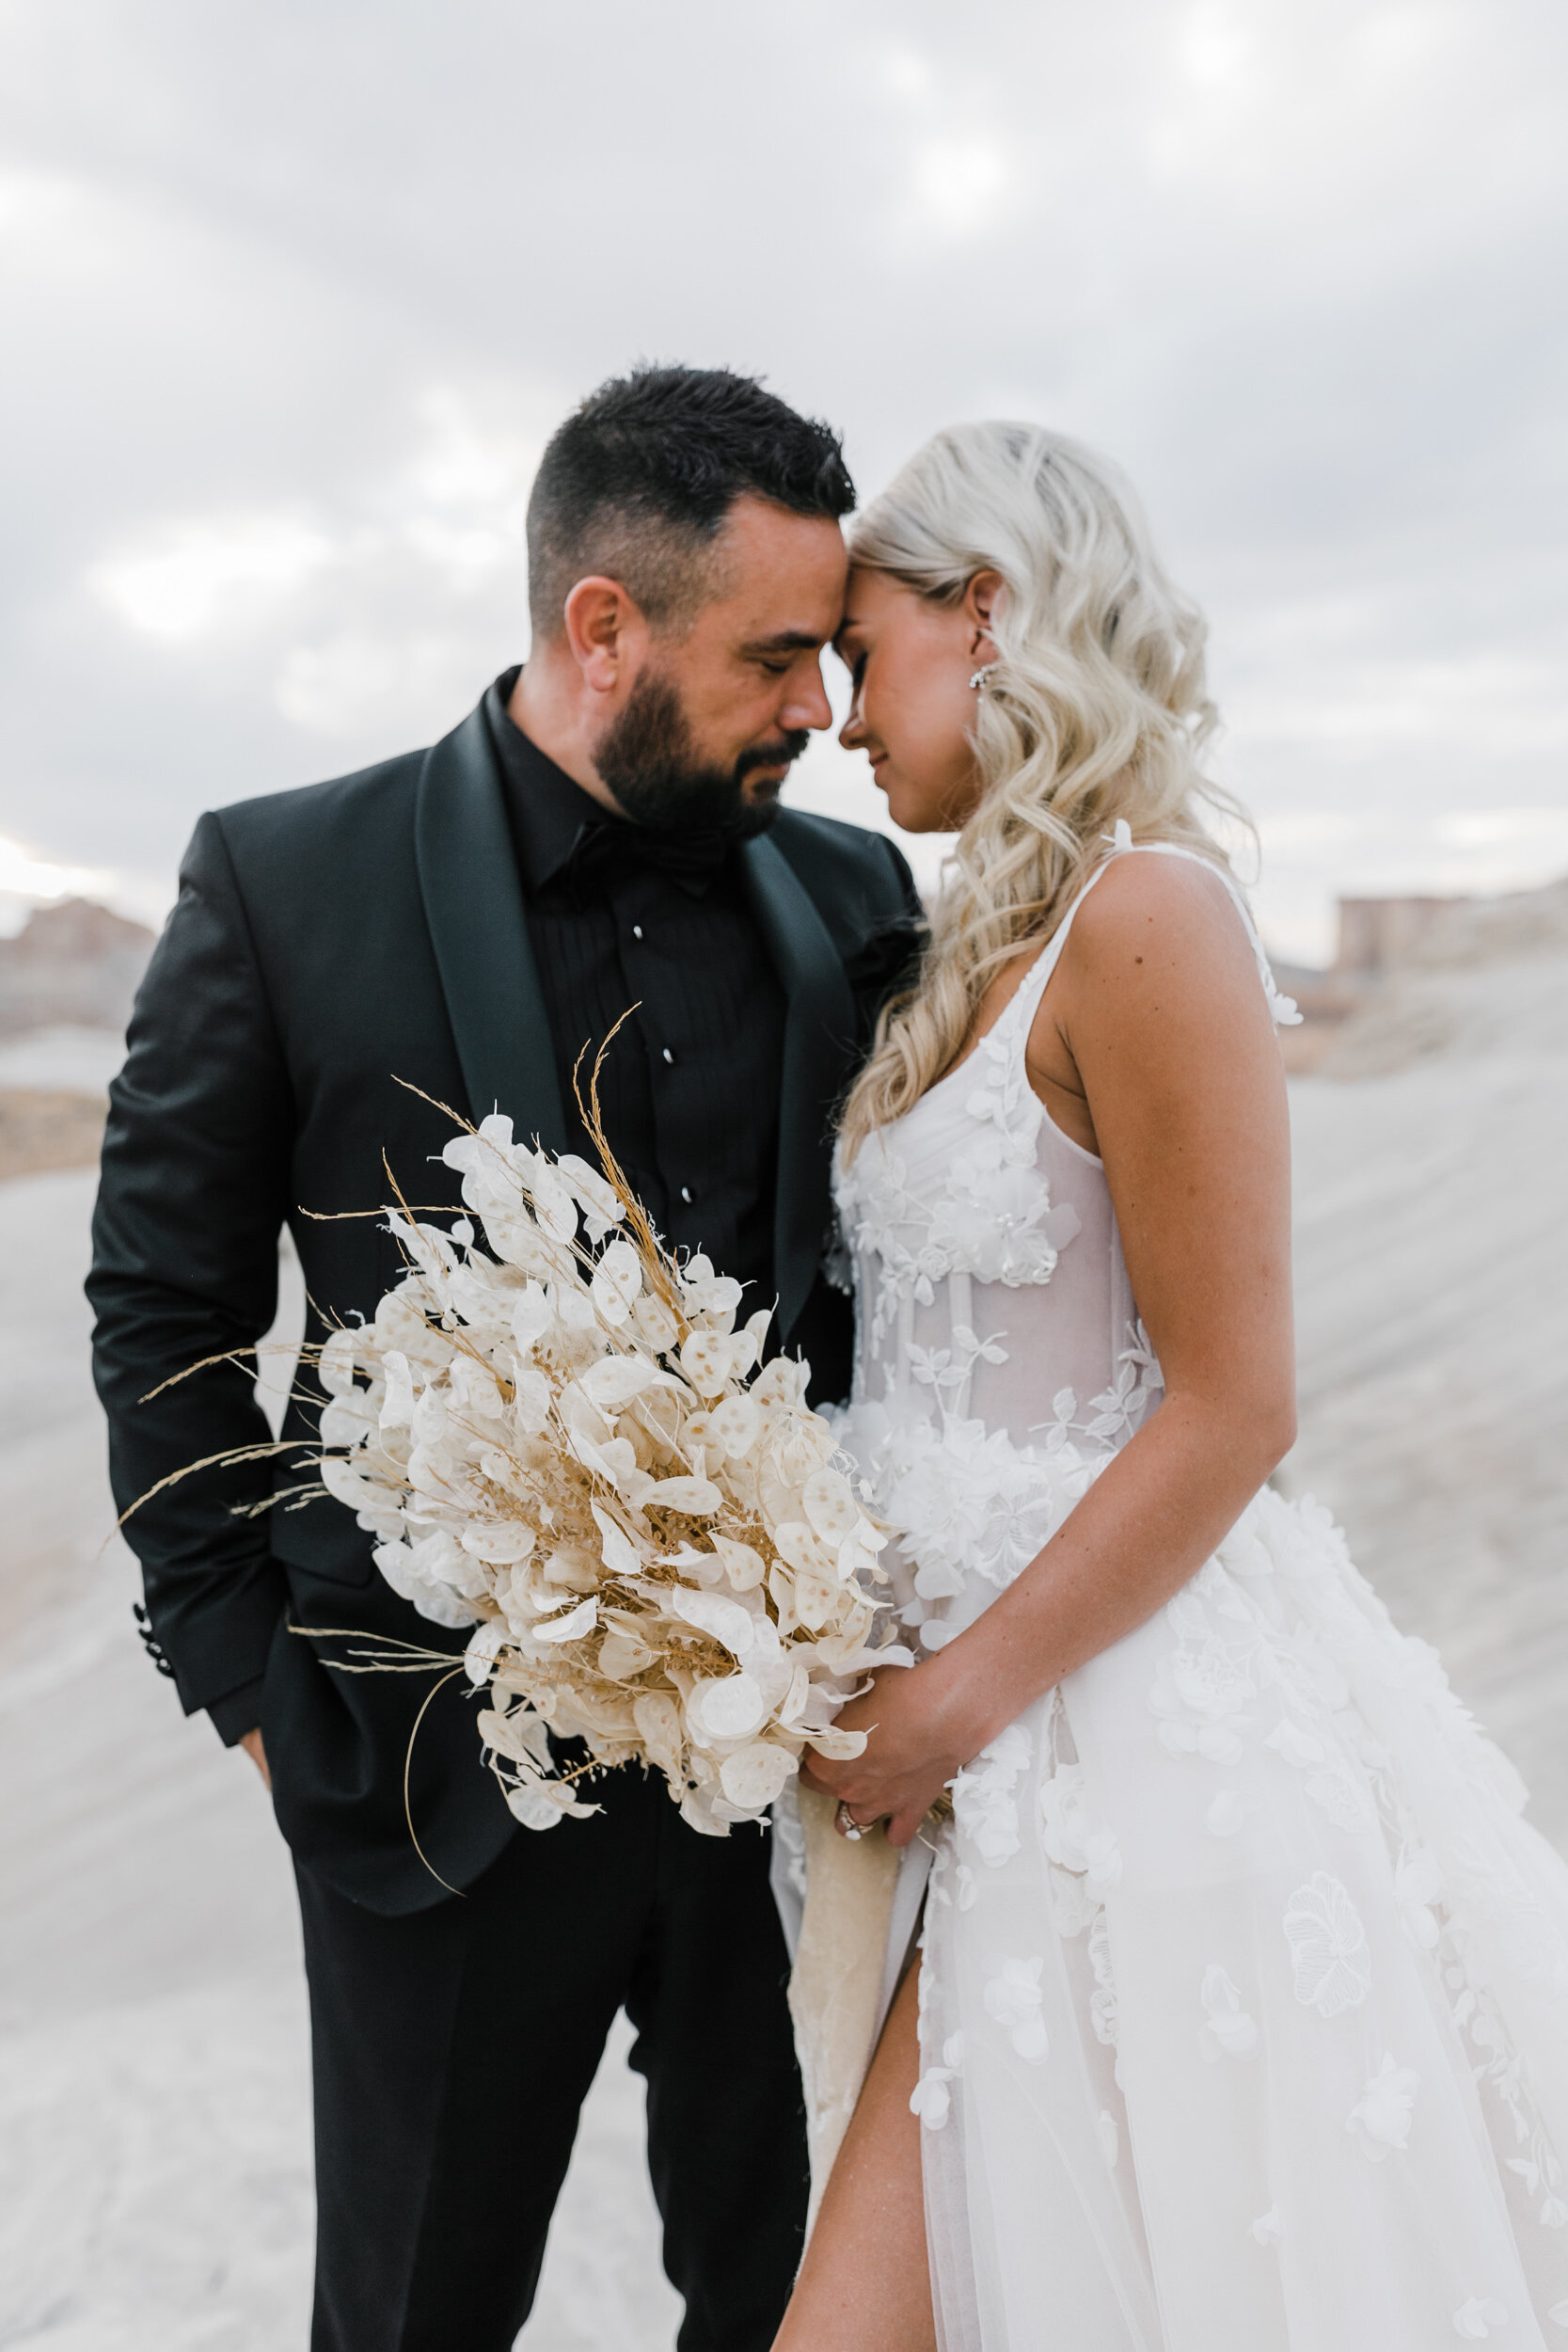 Adventure elopement photography at amangiri | The Hearnes